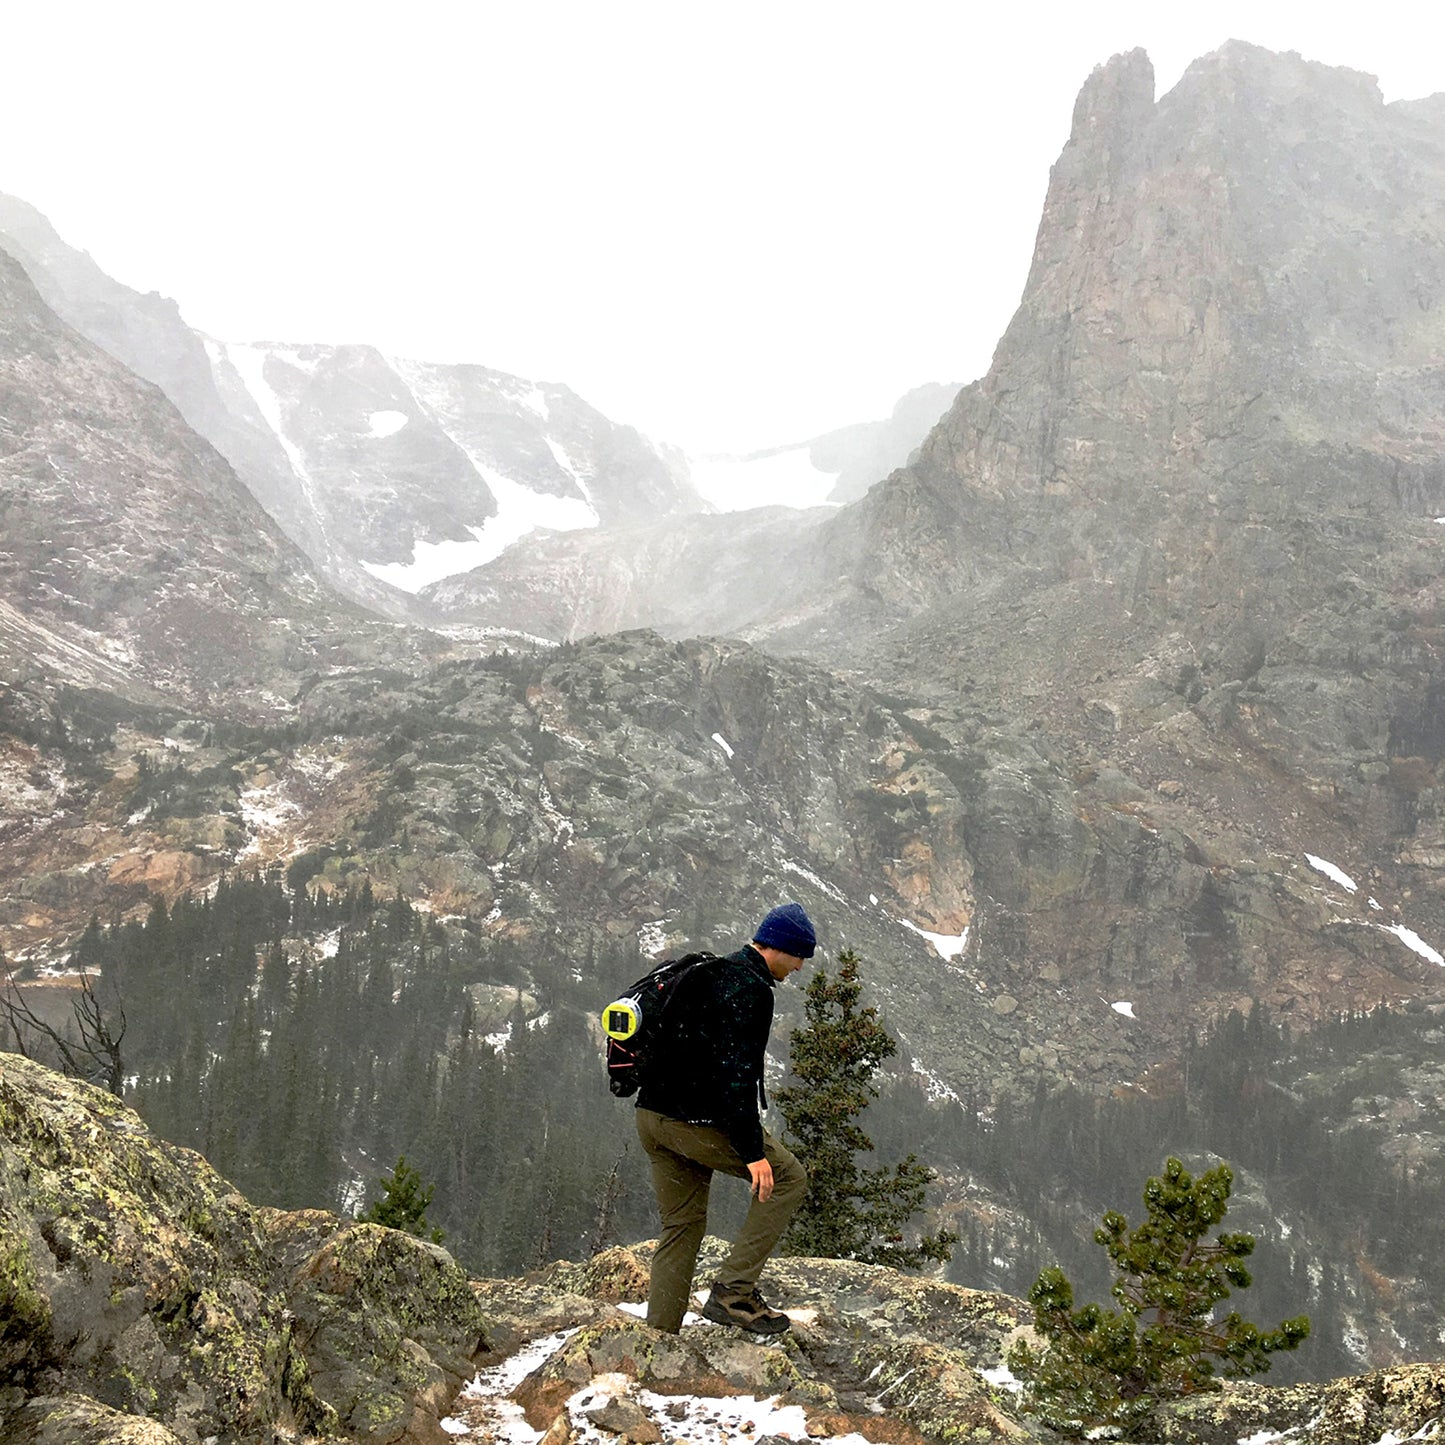 A man hikes in high altitude scenic mountains covered in snow. He wears a beanie and carries a backpack with a rechargeable Luci solar light attached.